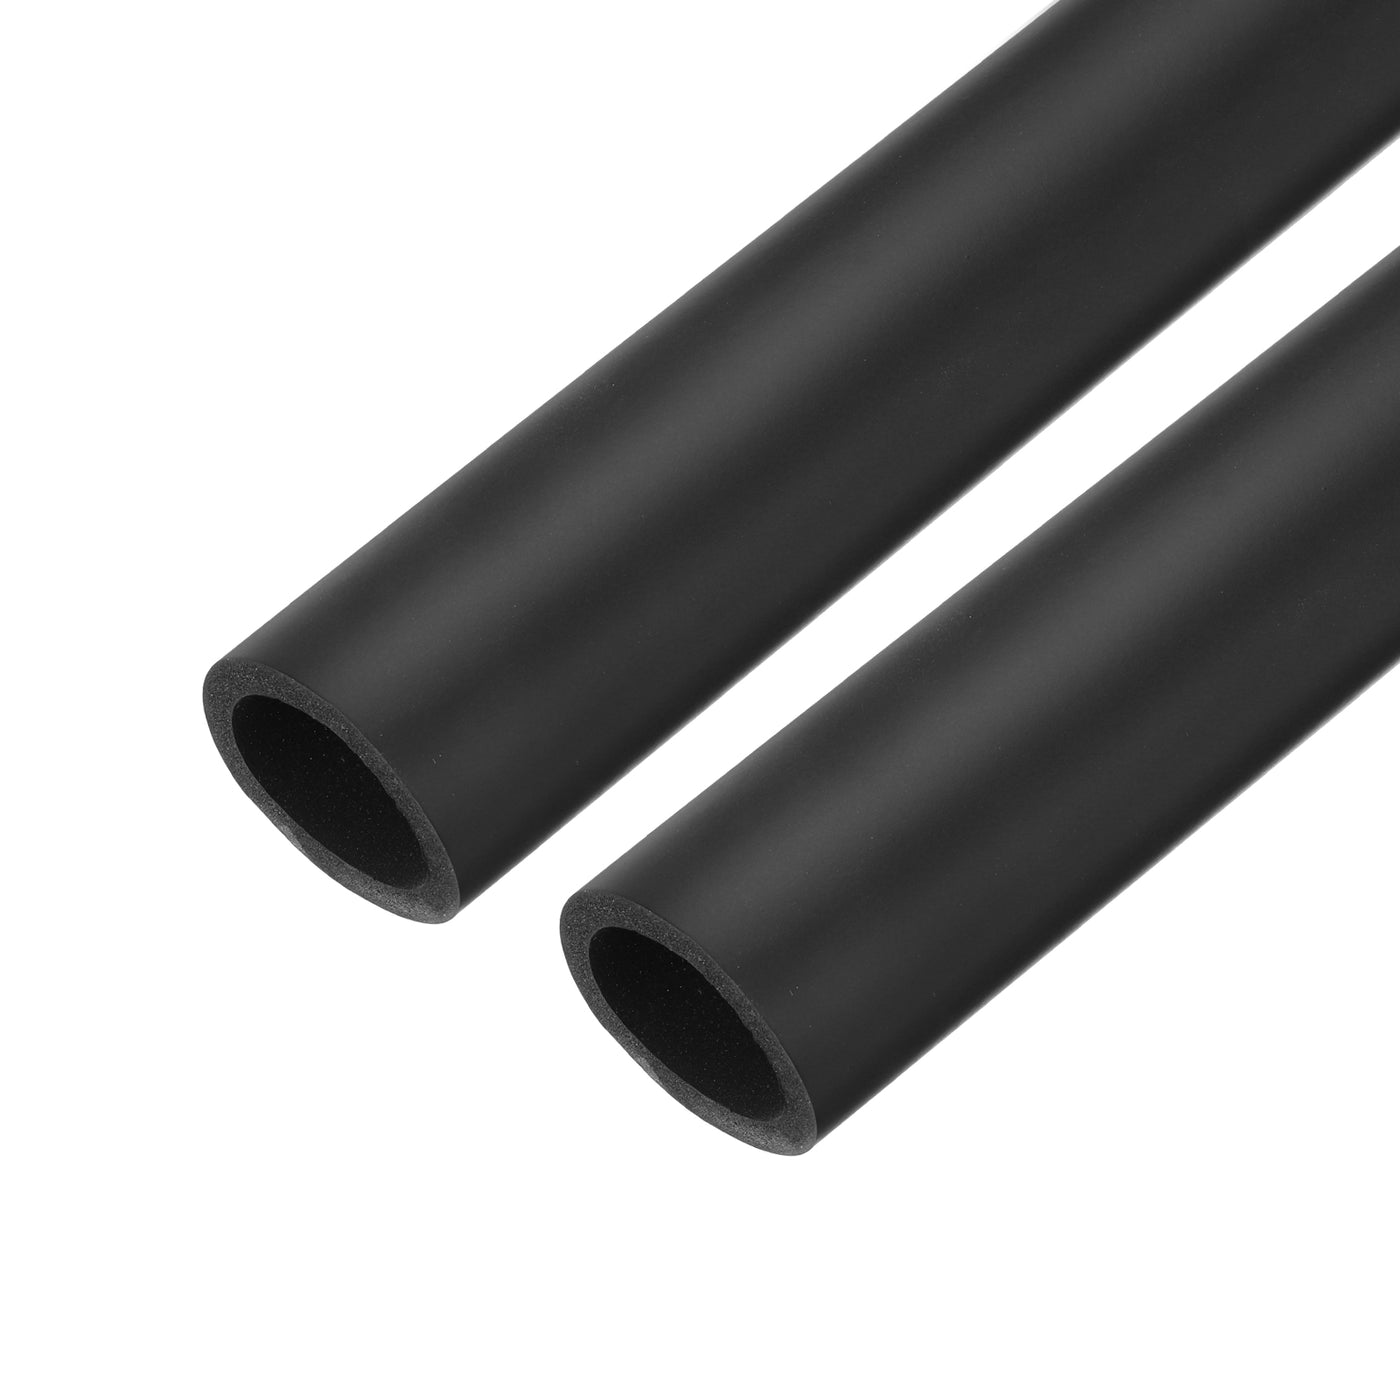 uxcell Uxcell 2pcs 3.3ft Pipe Insulation Tube 36mm ID 48mm OD Foam Tubing for Handle Grip Support, Black